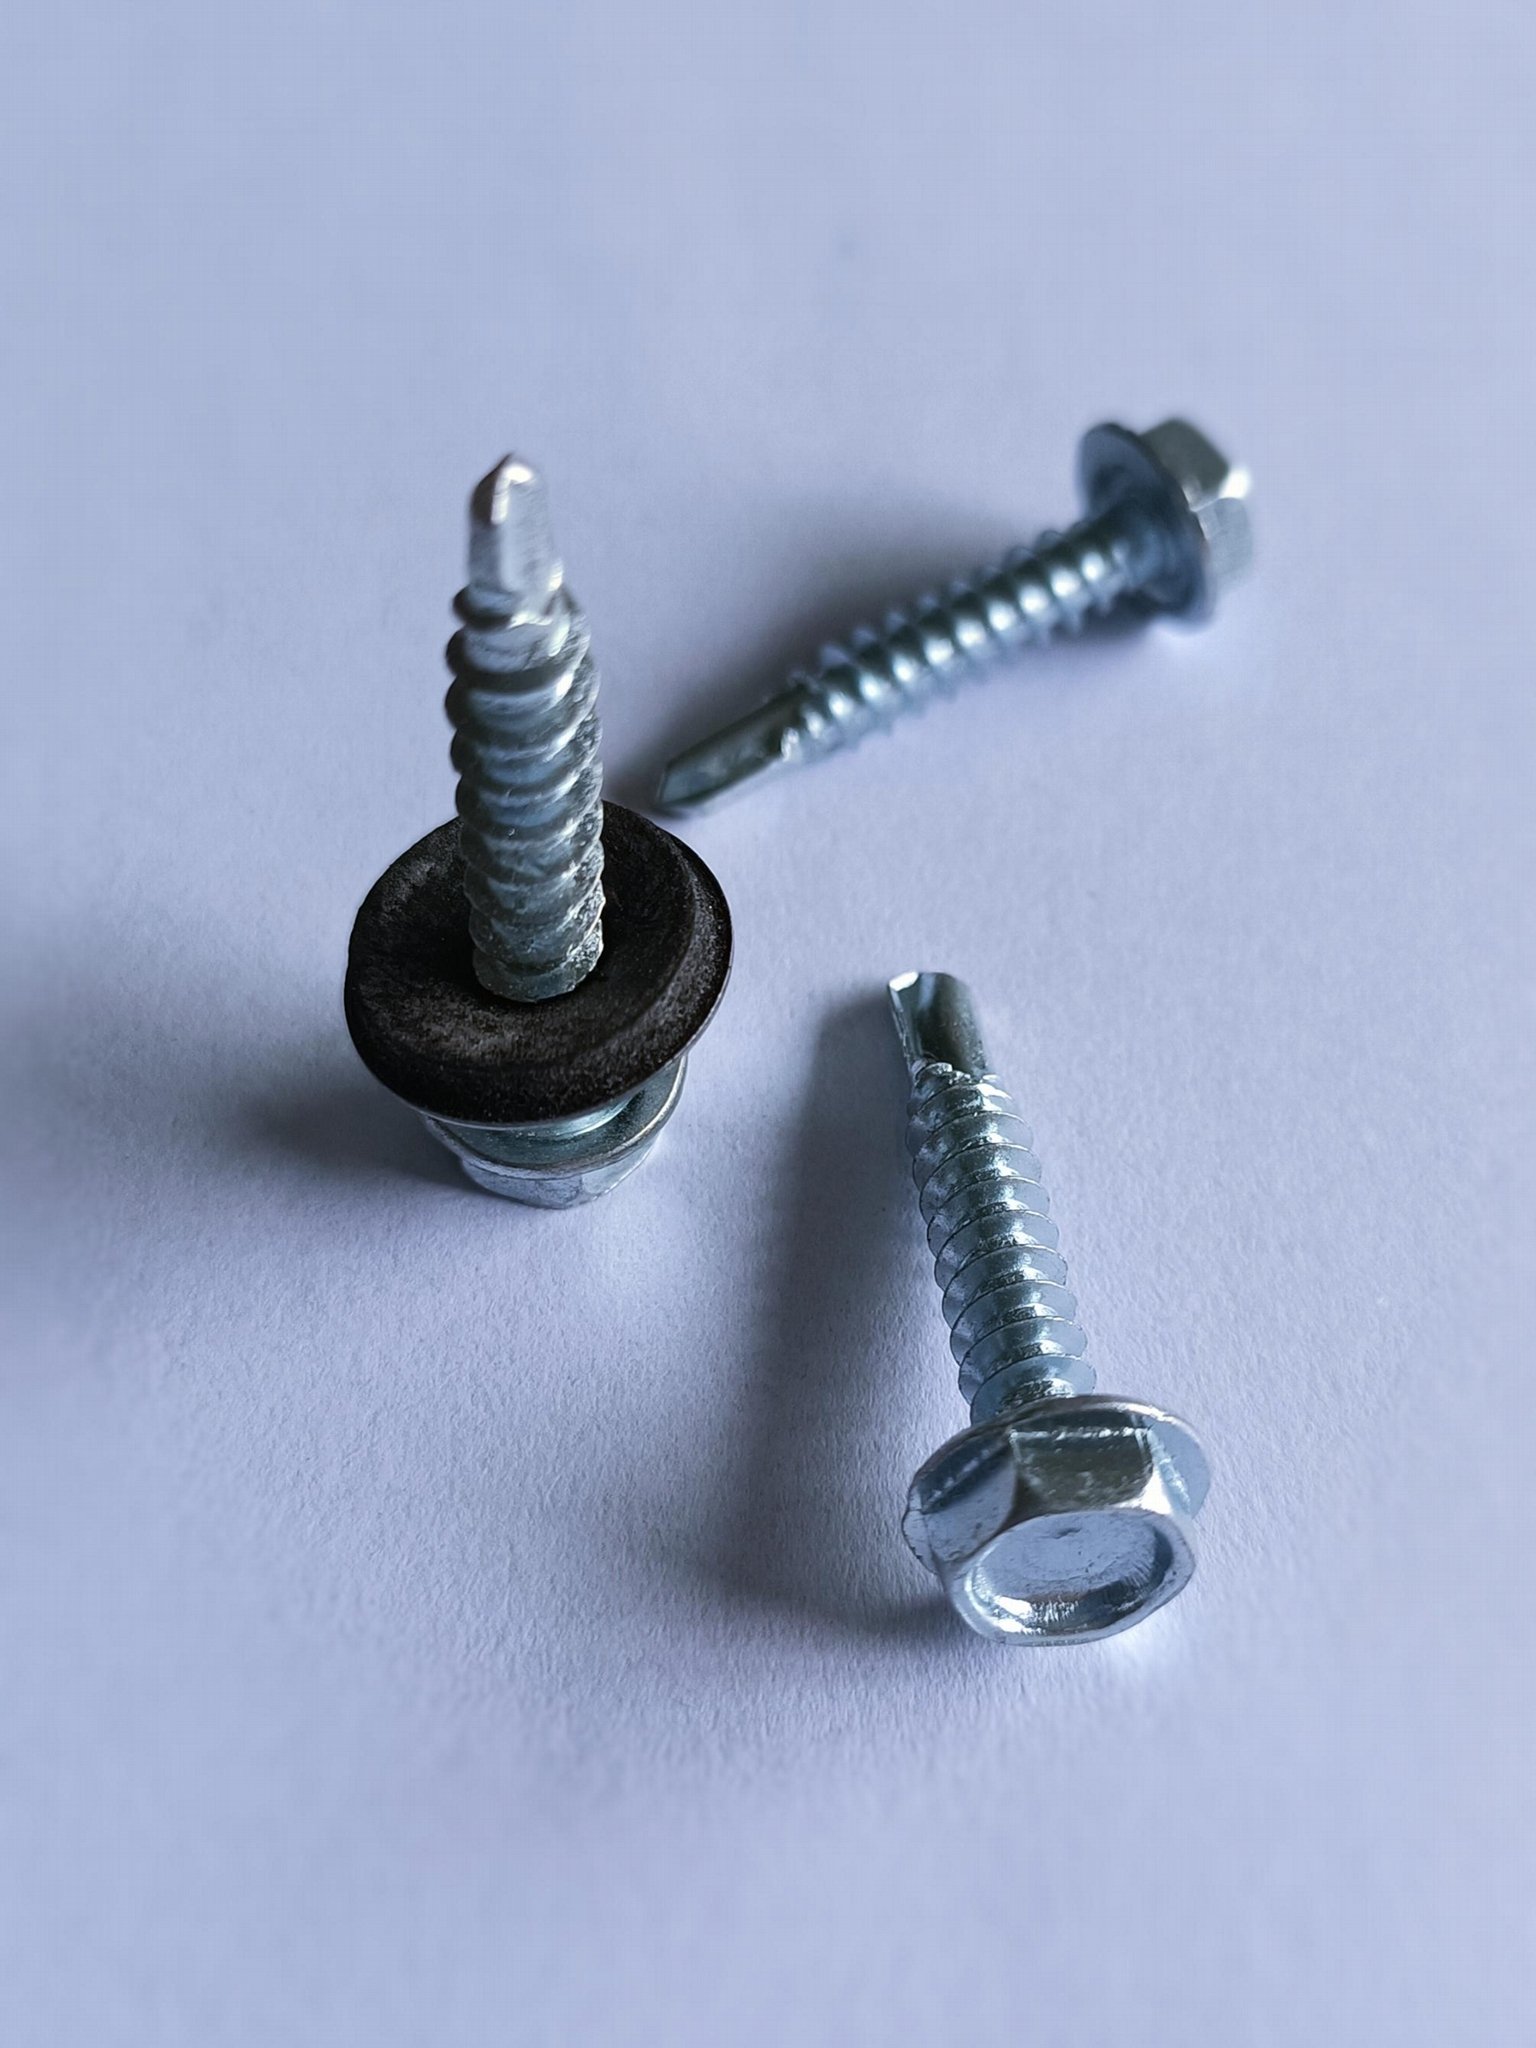 DIN7504 EPDM washer zinc plated hex head self drilling screw 2